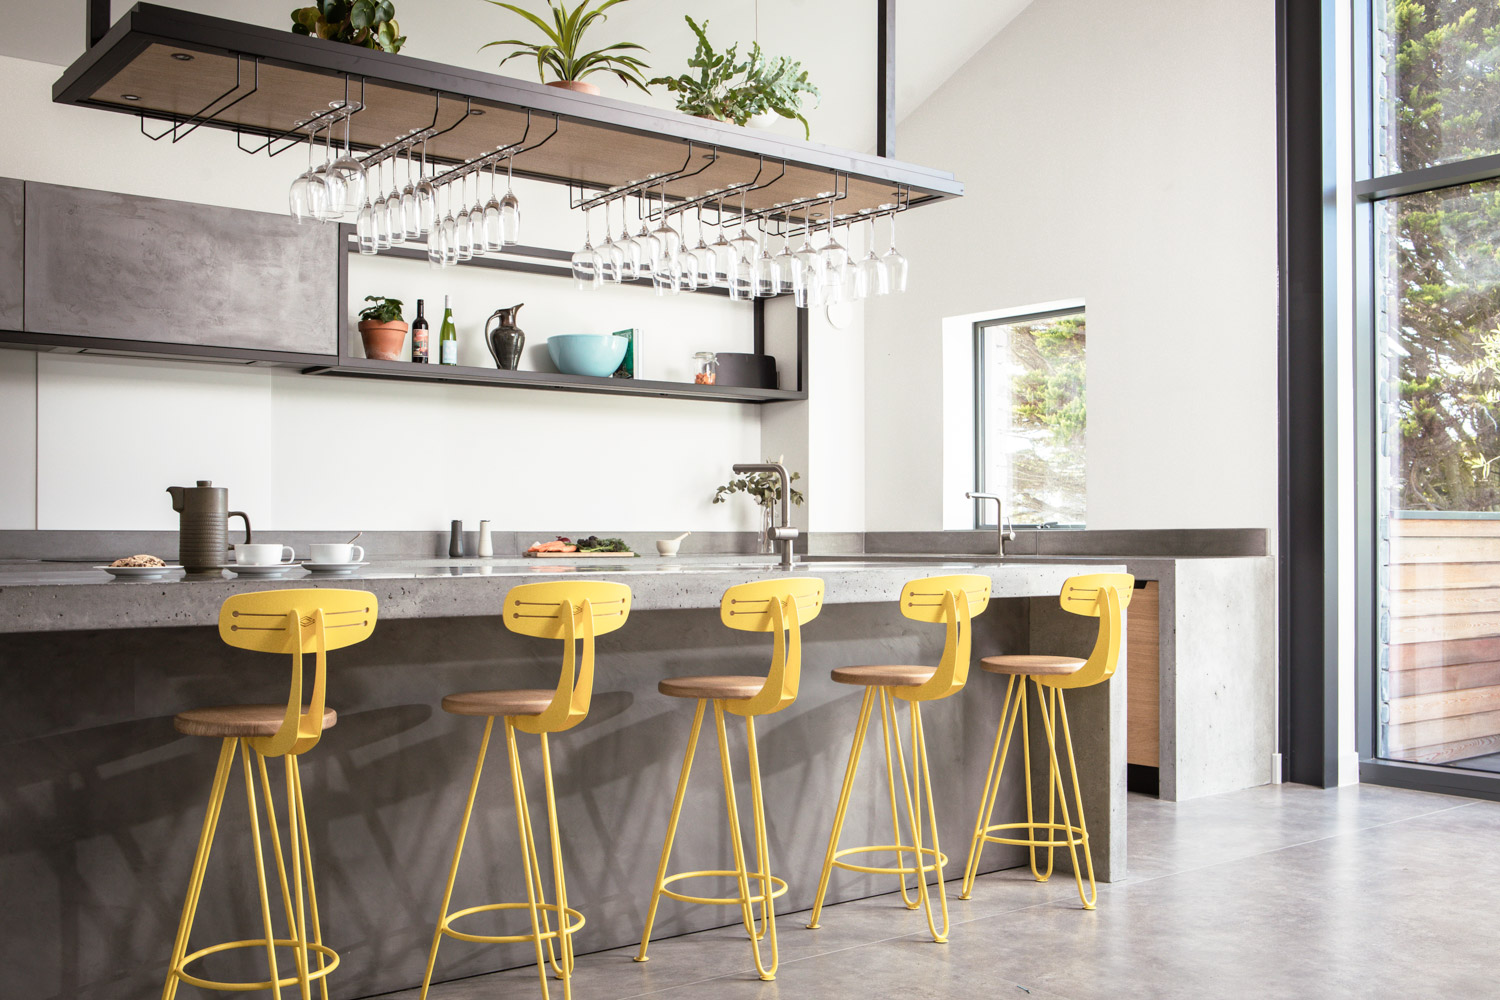 One of our interiors. A kitchen island with yellow hairpin leg bar stools